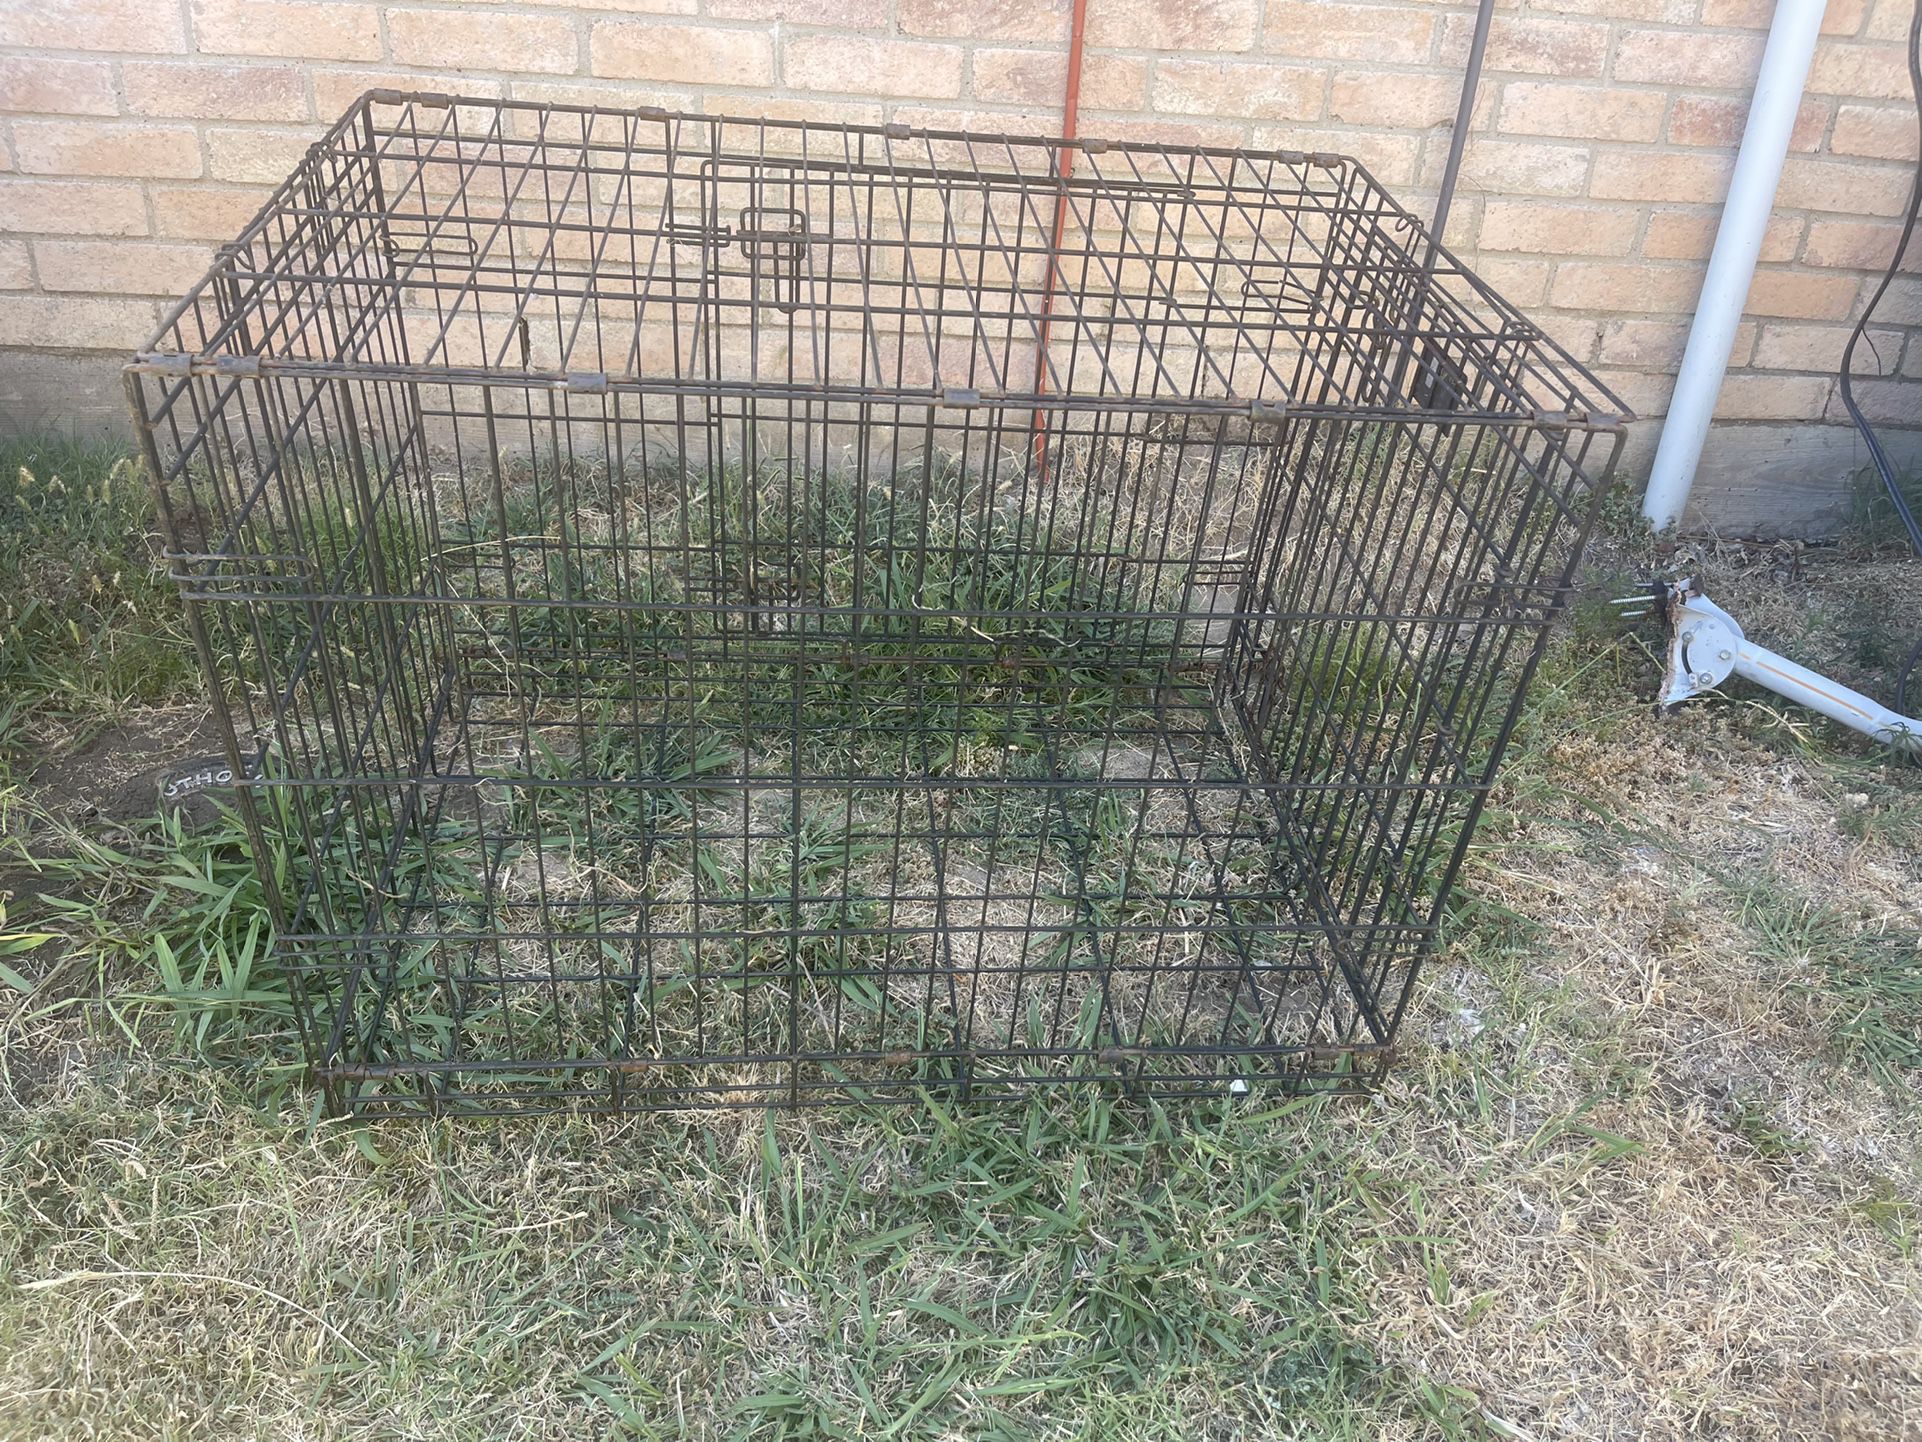 Large Cage